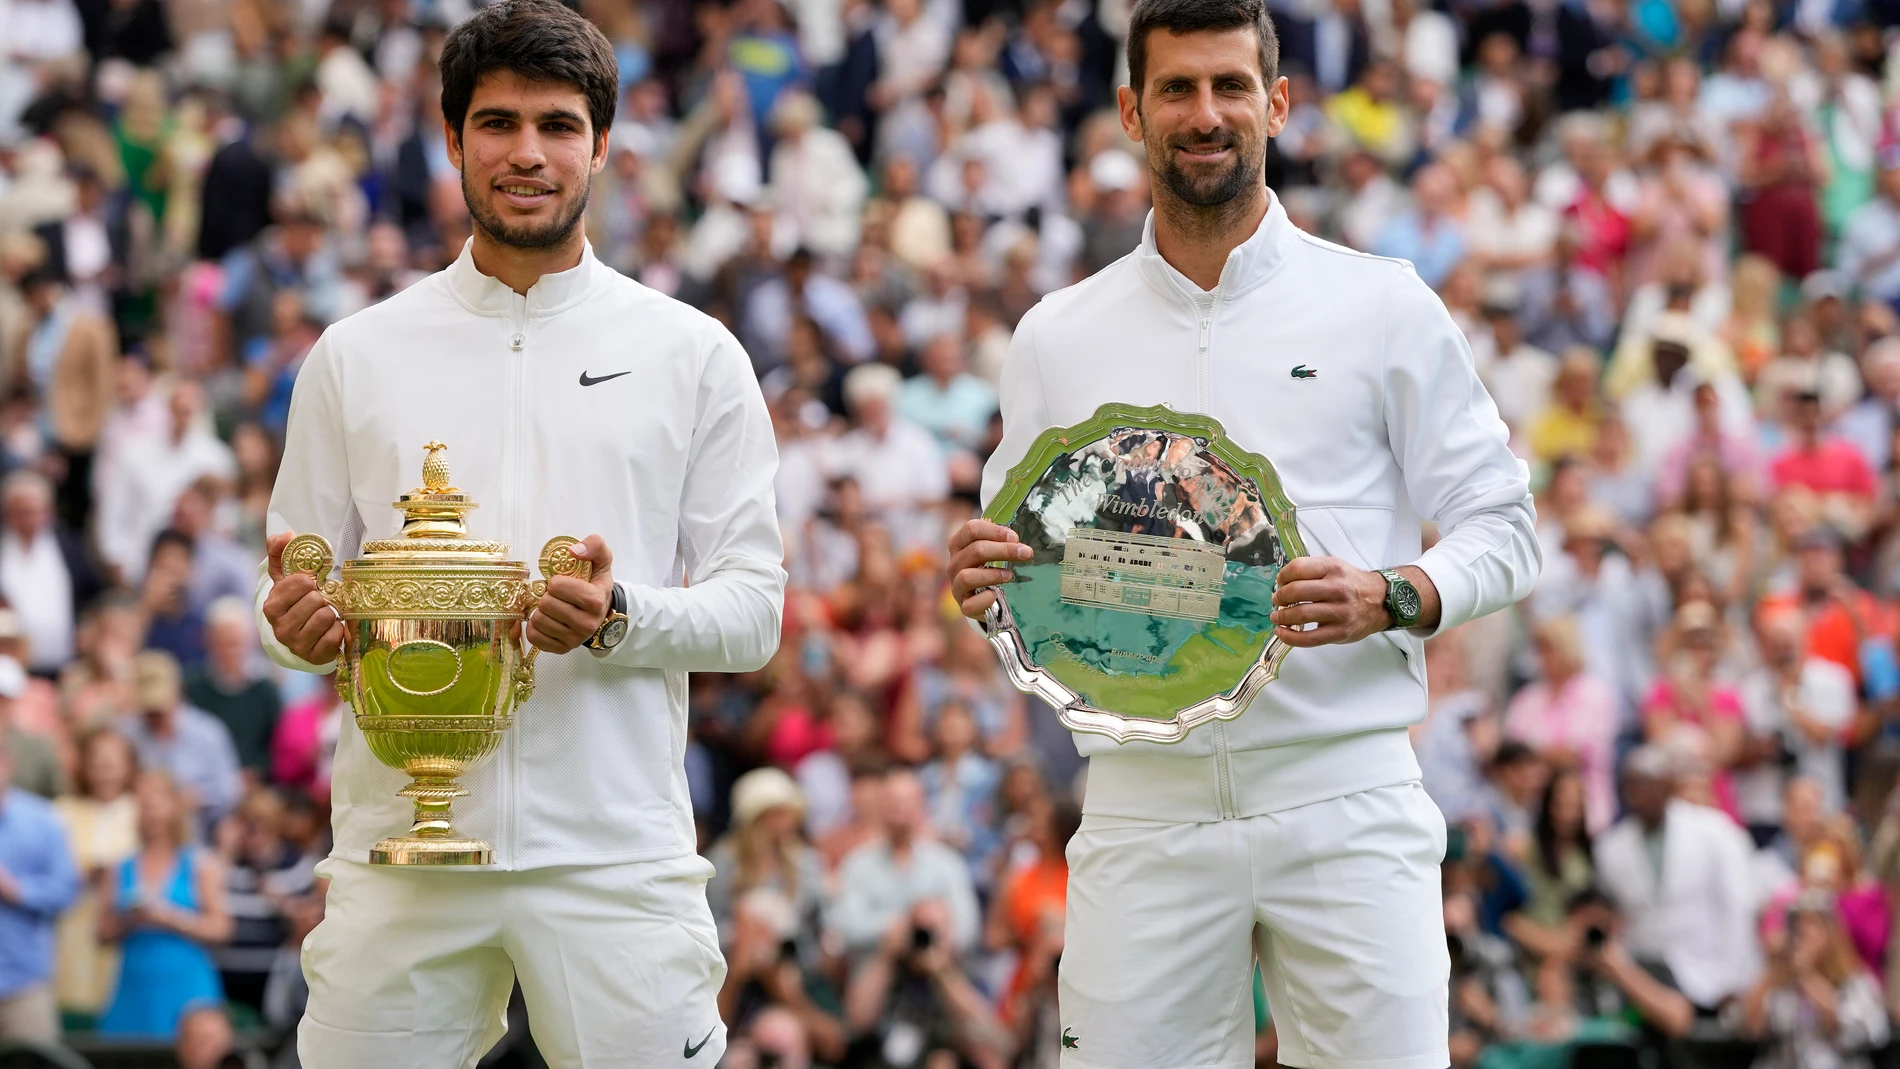 Spain's Carlos Alcaraz, left, celebrates with the trophy after beating Serbia's Novak Djokovic, right, to win the final of the men's singles on day fourteen of the Wimbledon tennis championships in London, Sunday, July 16, 2023. (AP Photo/Kirsty Wigglesworth)